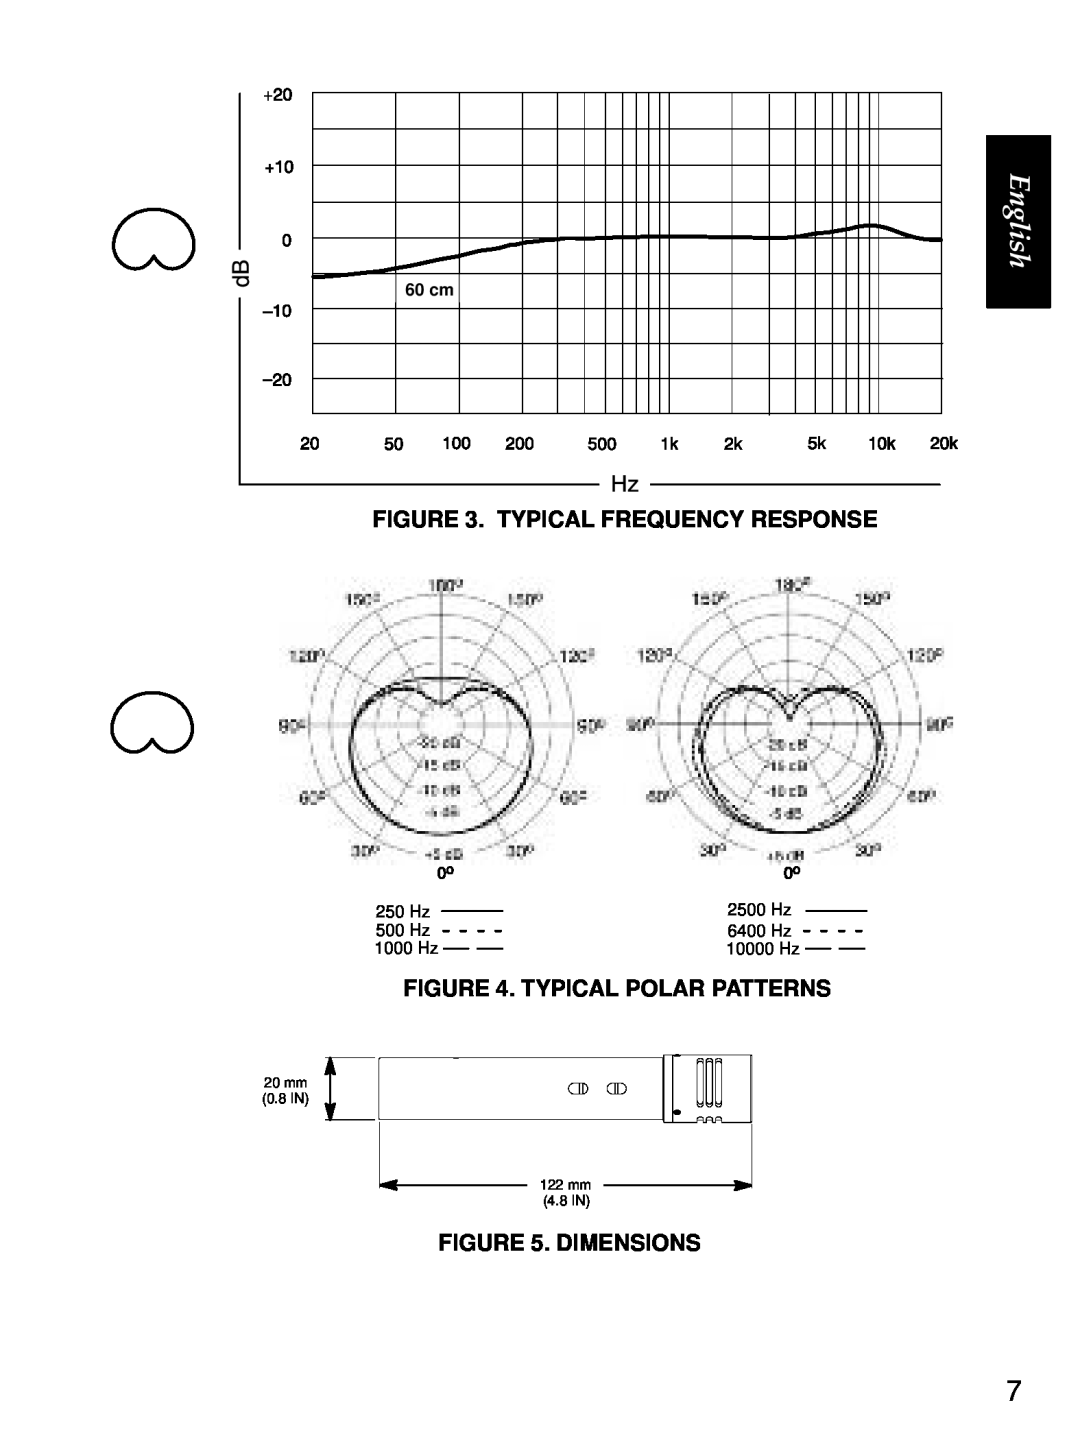 Shure KSM137 manual Typical Frequency Response, Typical Polar Patterns, Dimensions, 60 cm, 20 mm 0.8 IN 122 mm 4.8 IN 